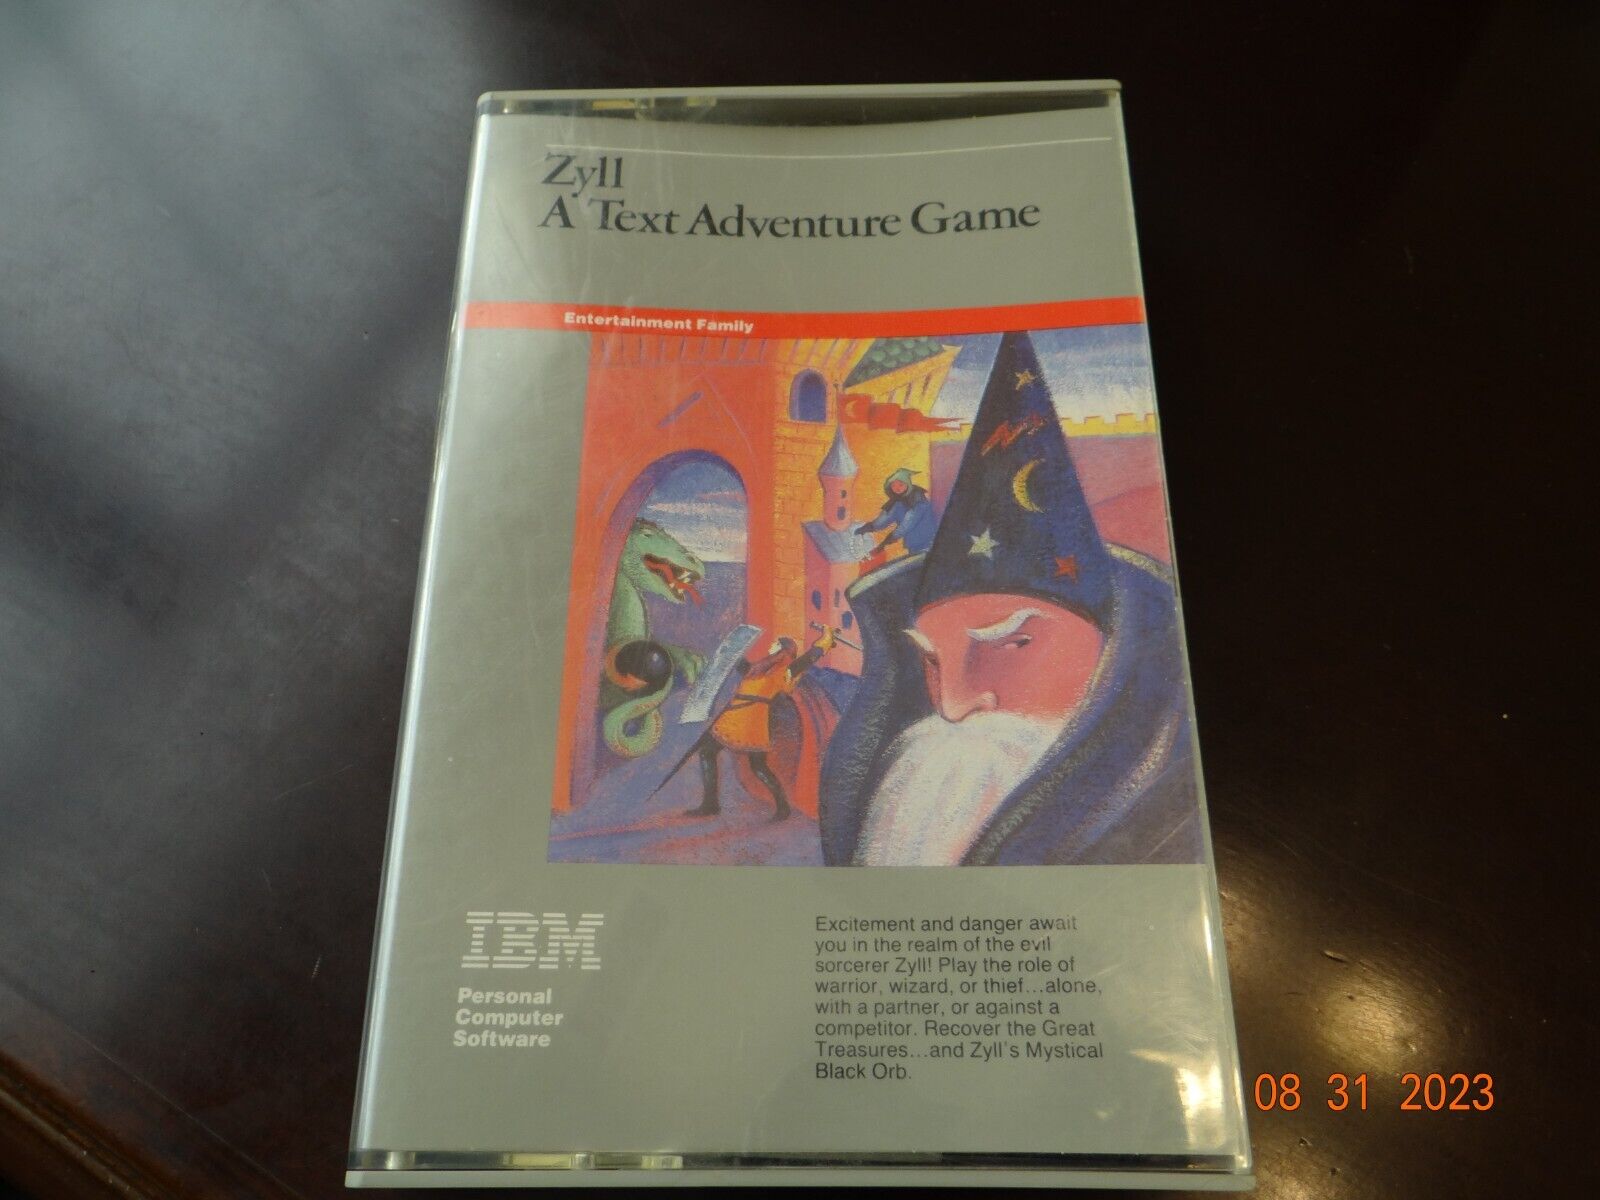 1984 Zyll IBM A Text Adventure Game, complete w/ case, manual, floppy, 1st ed.